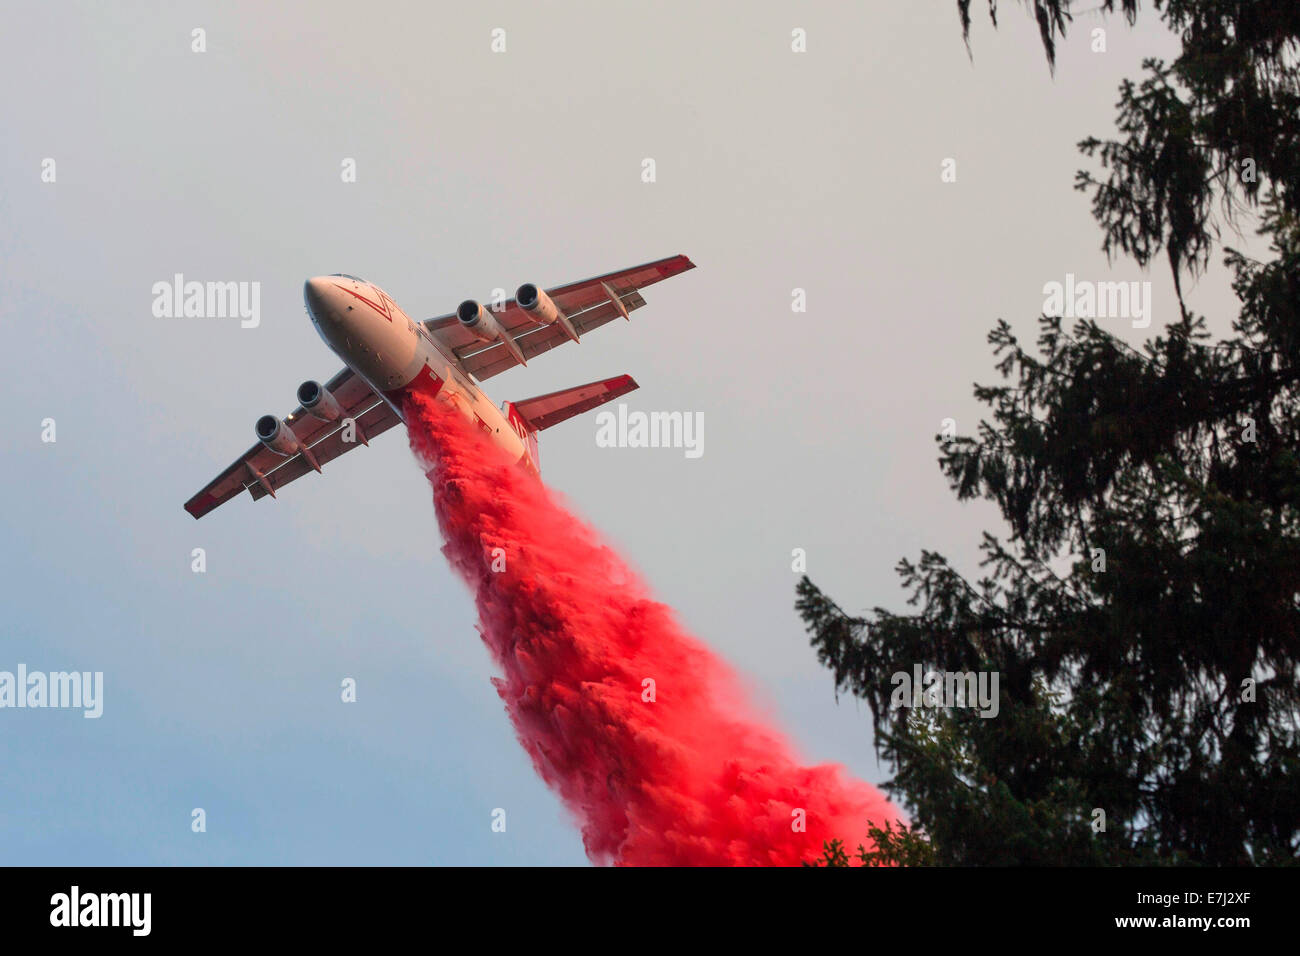 A BAE 146 air tanker drops fire retardant on the Happy Camp Complex Fire burning in the Klamath National Forest September 18, 2014 in Yreka, California. The fire has consumed 125,788 acres and is 68% contained. Stock Photo